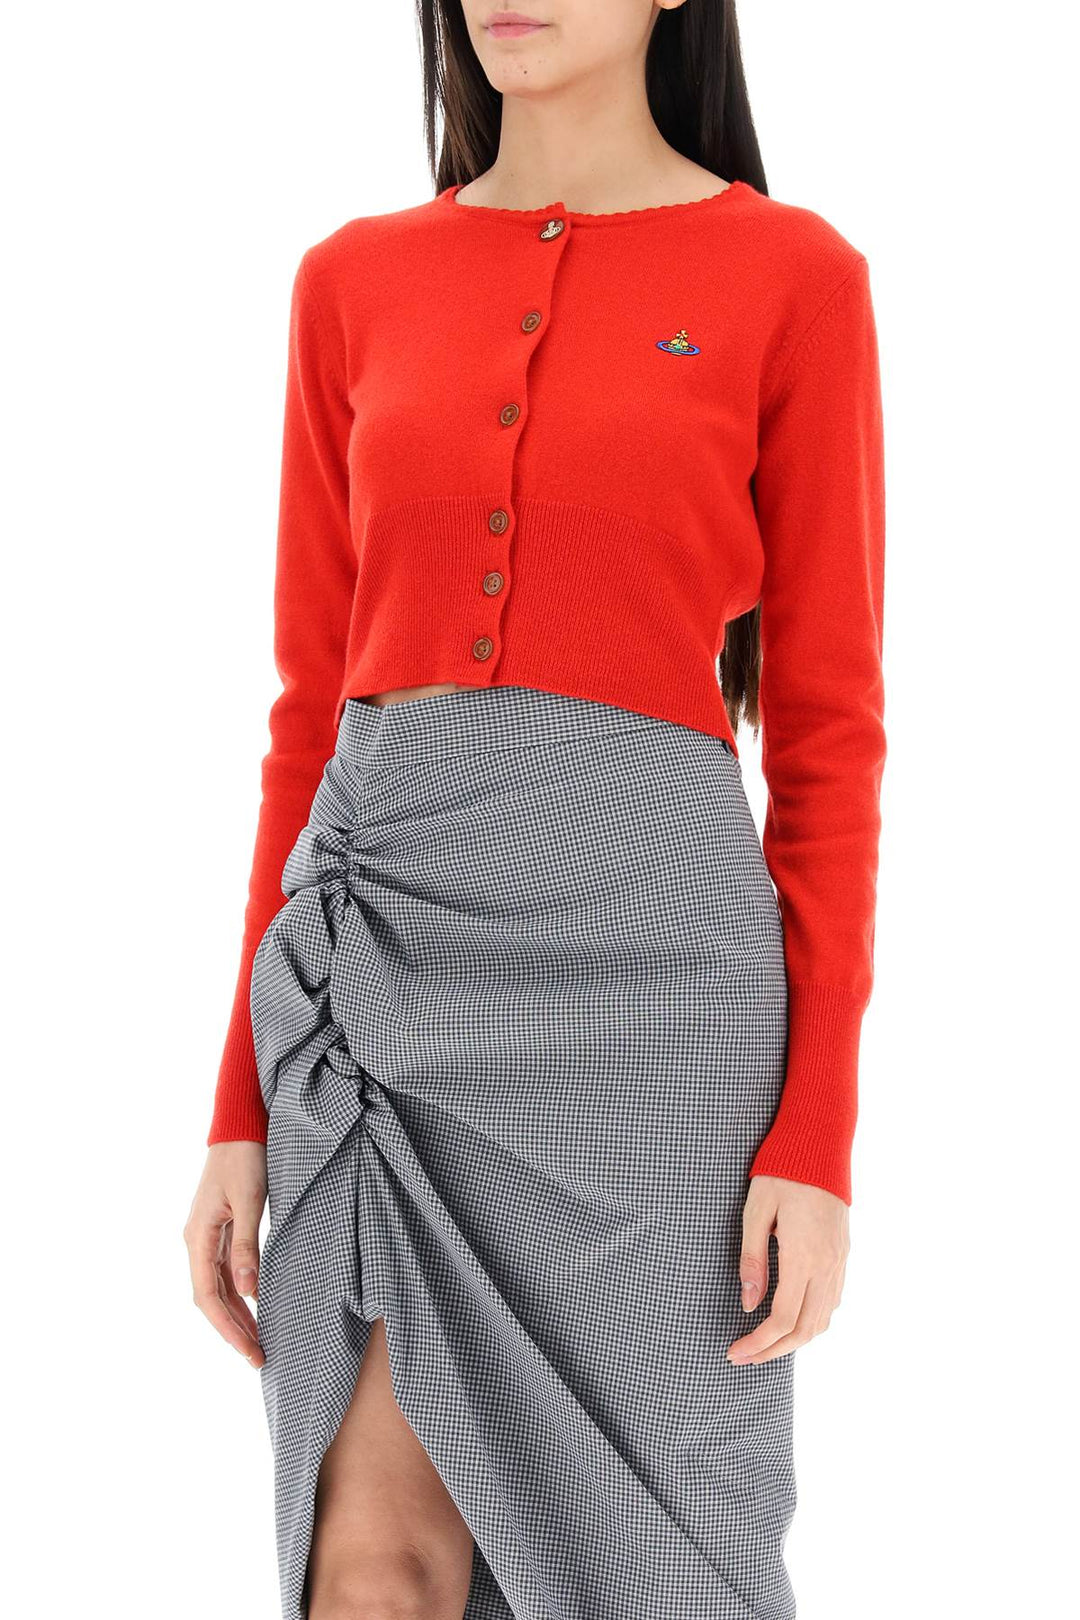 Vivienne Westwood Bea Cropped Cardigan   Rosso